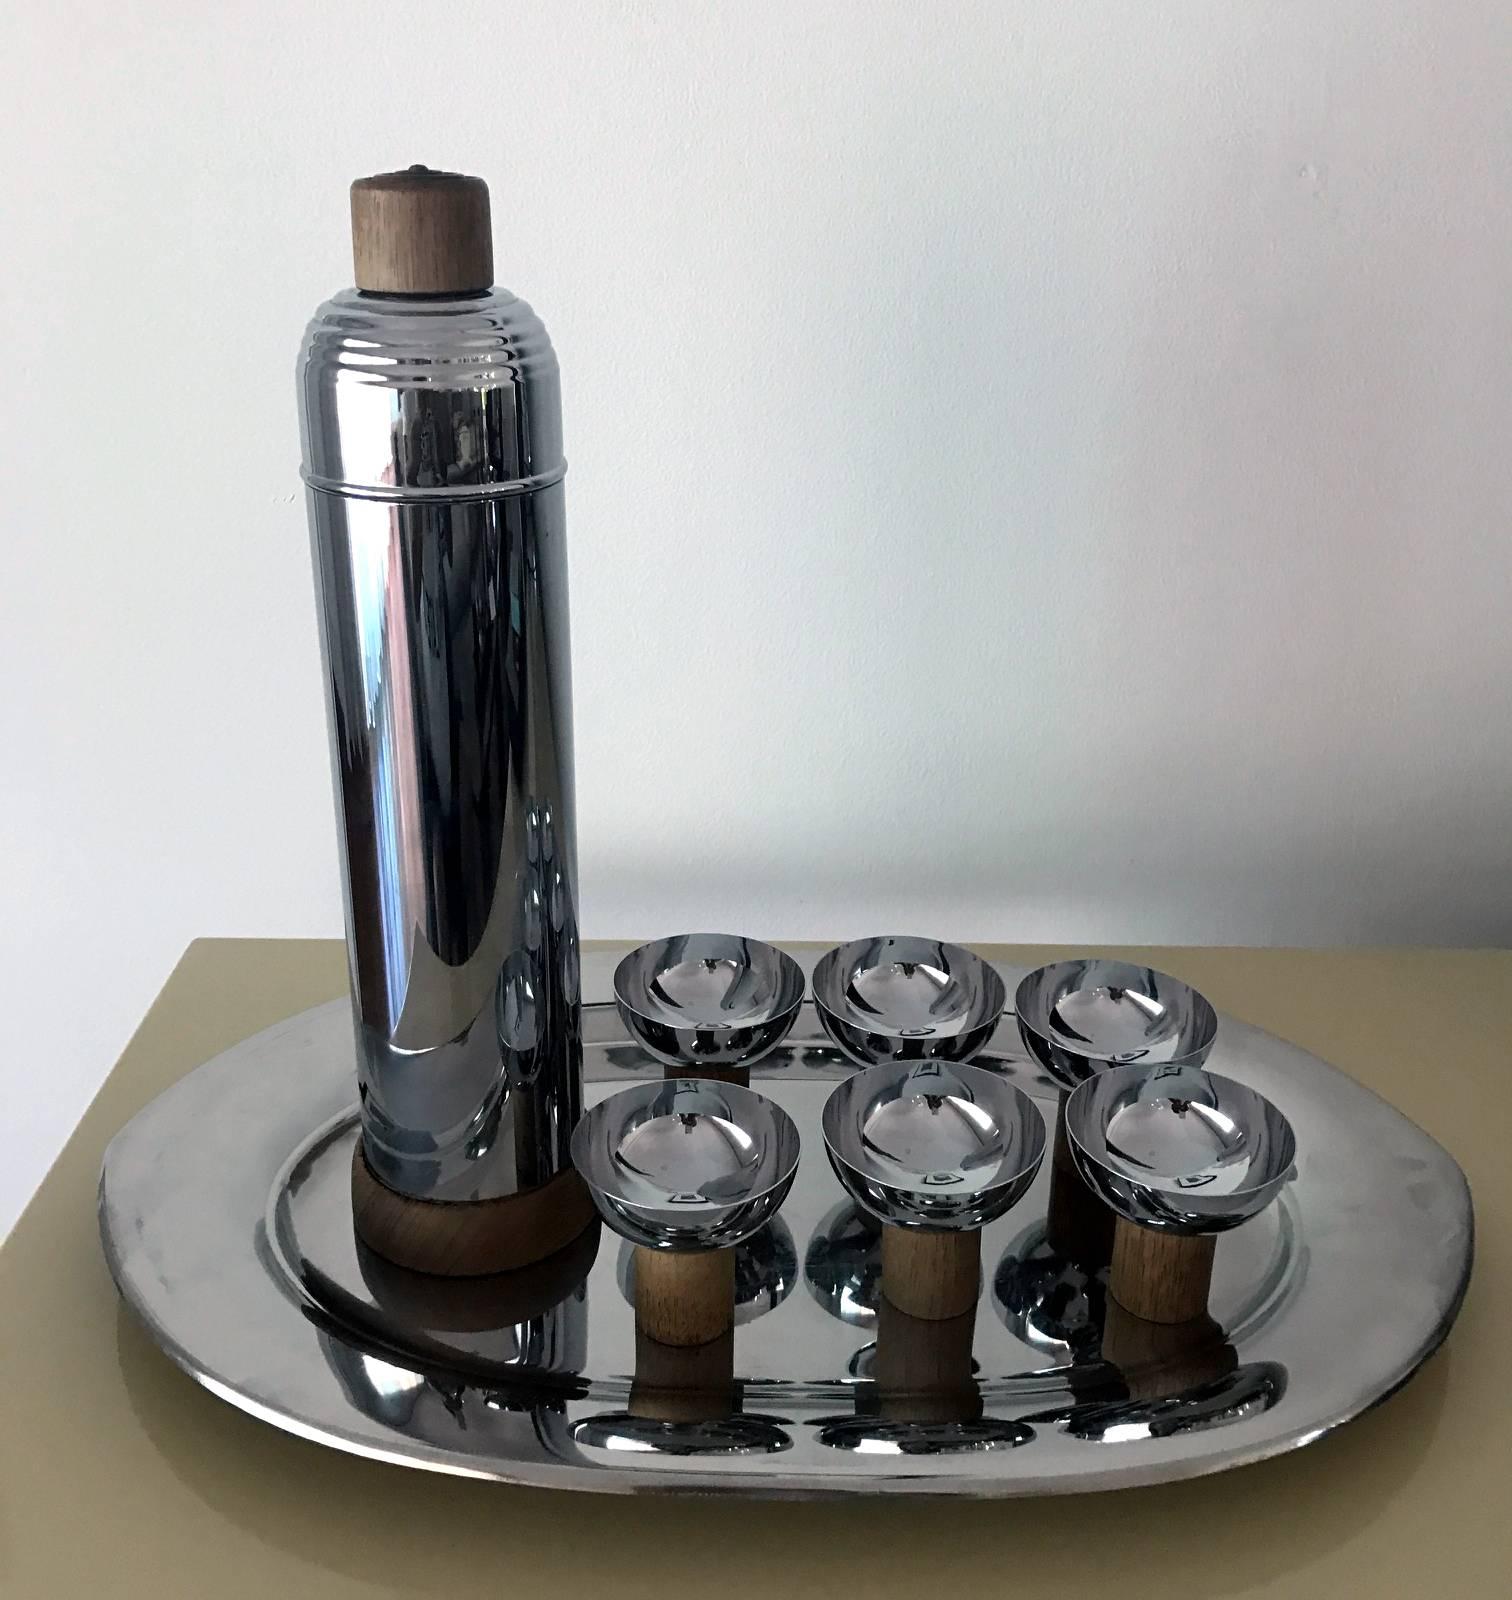 A very cool set of Art Deco style service set from machine age of Japan circa postwar1950s. The chrome set is consist of a carafe with lid, a large tray and six cups with wood accents. The geometrical design is simple and elegant. It has a versatile